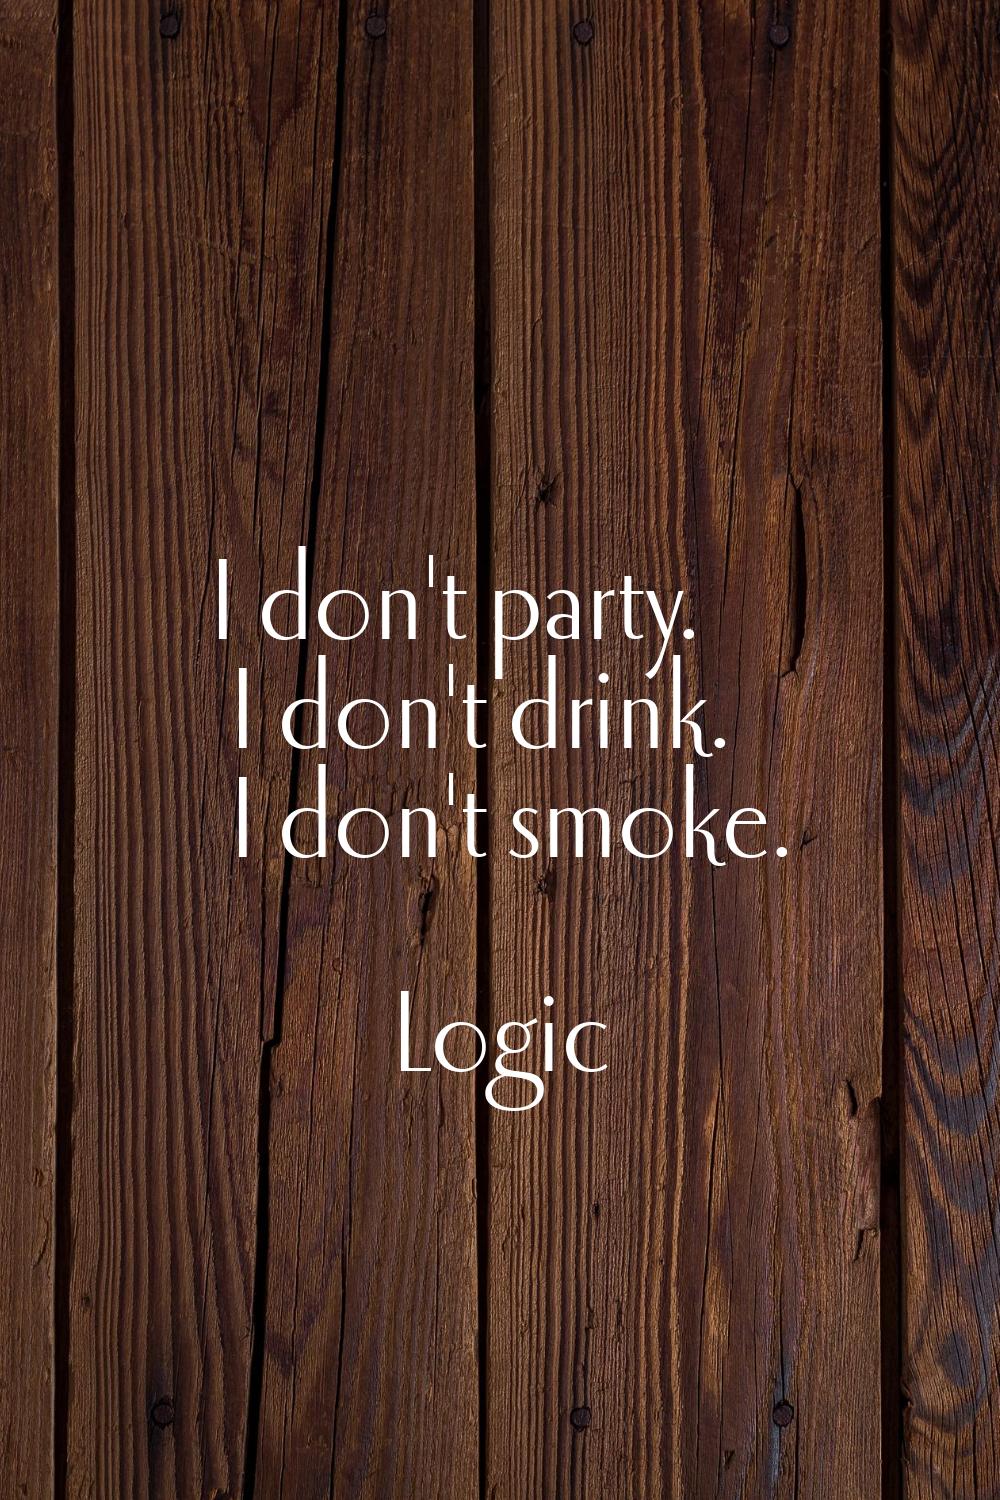 I don't party. I don't drink. I don't smoke.